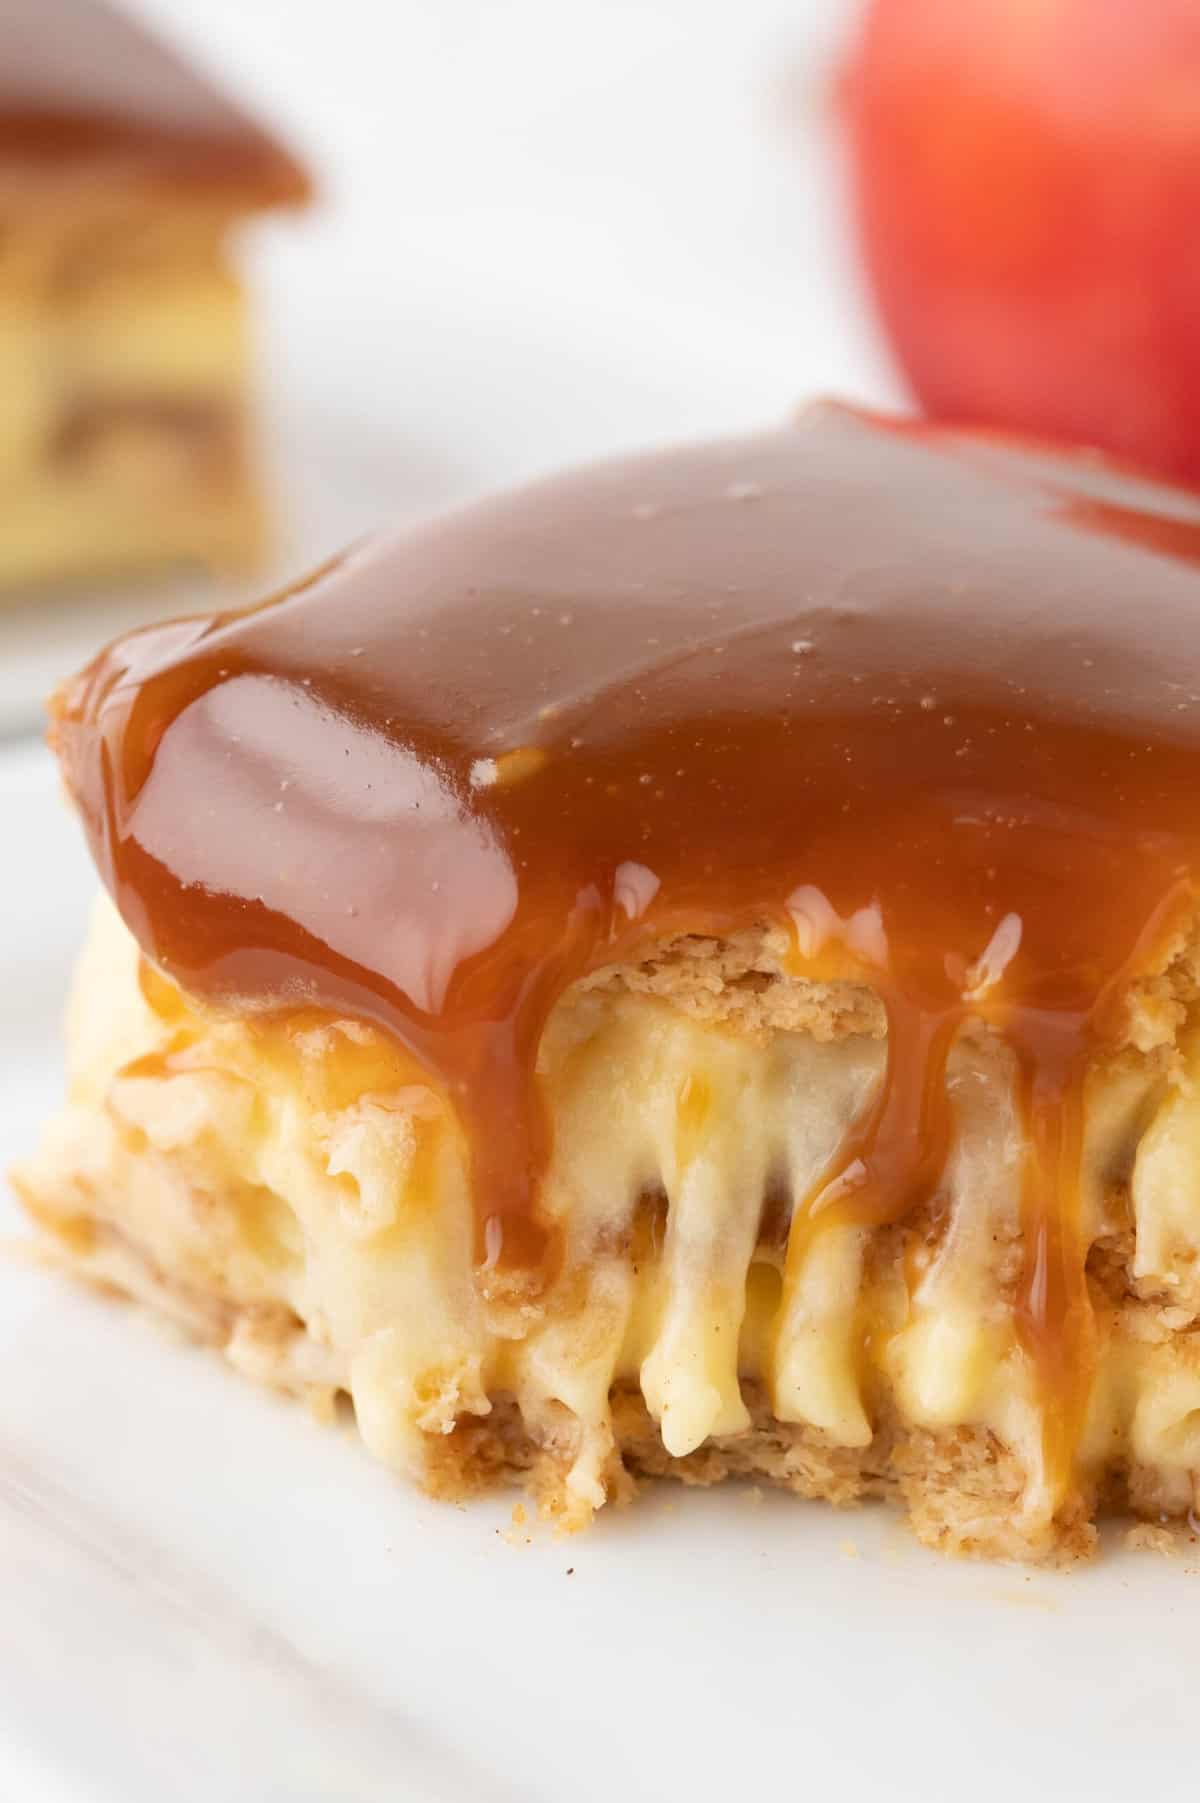 A close image of a piece of caramel apple eclair cake with a bite taken out of it.